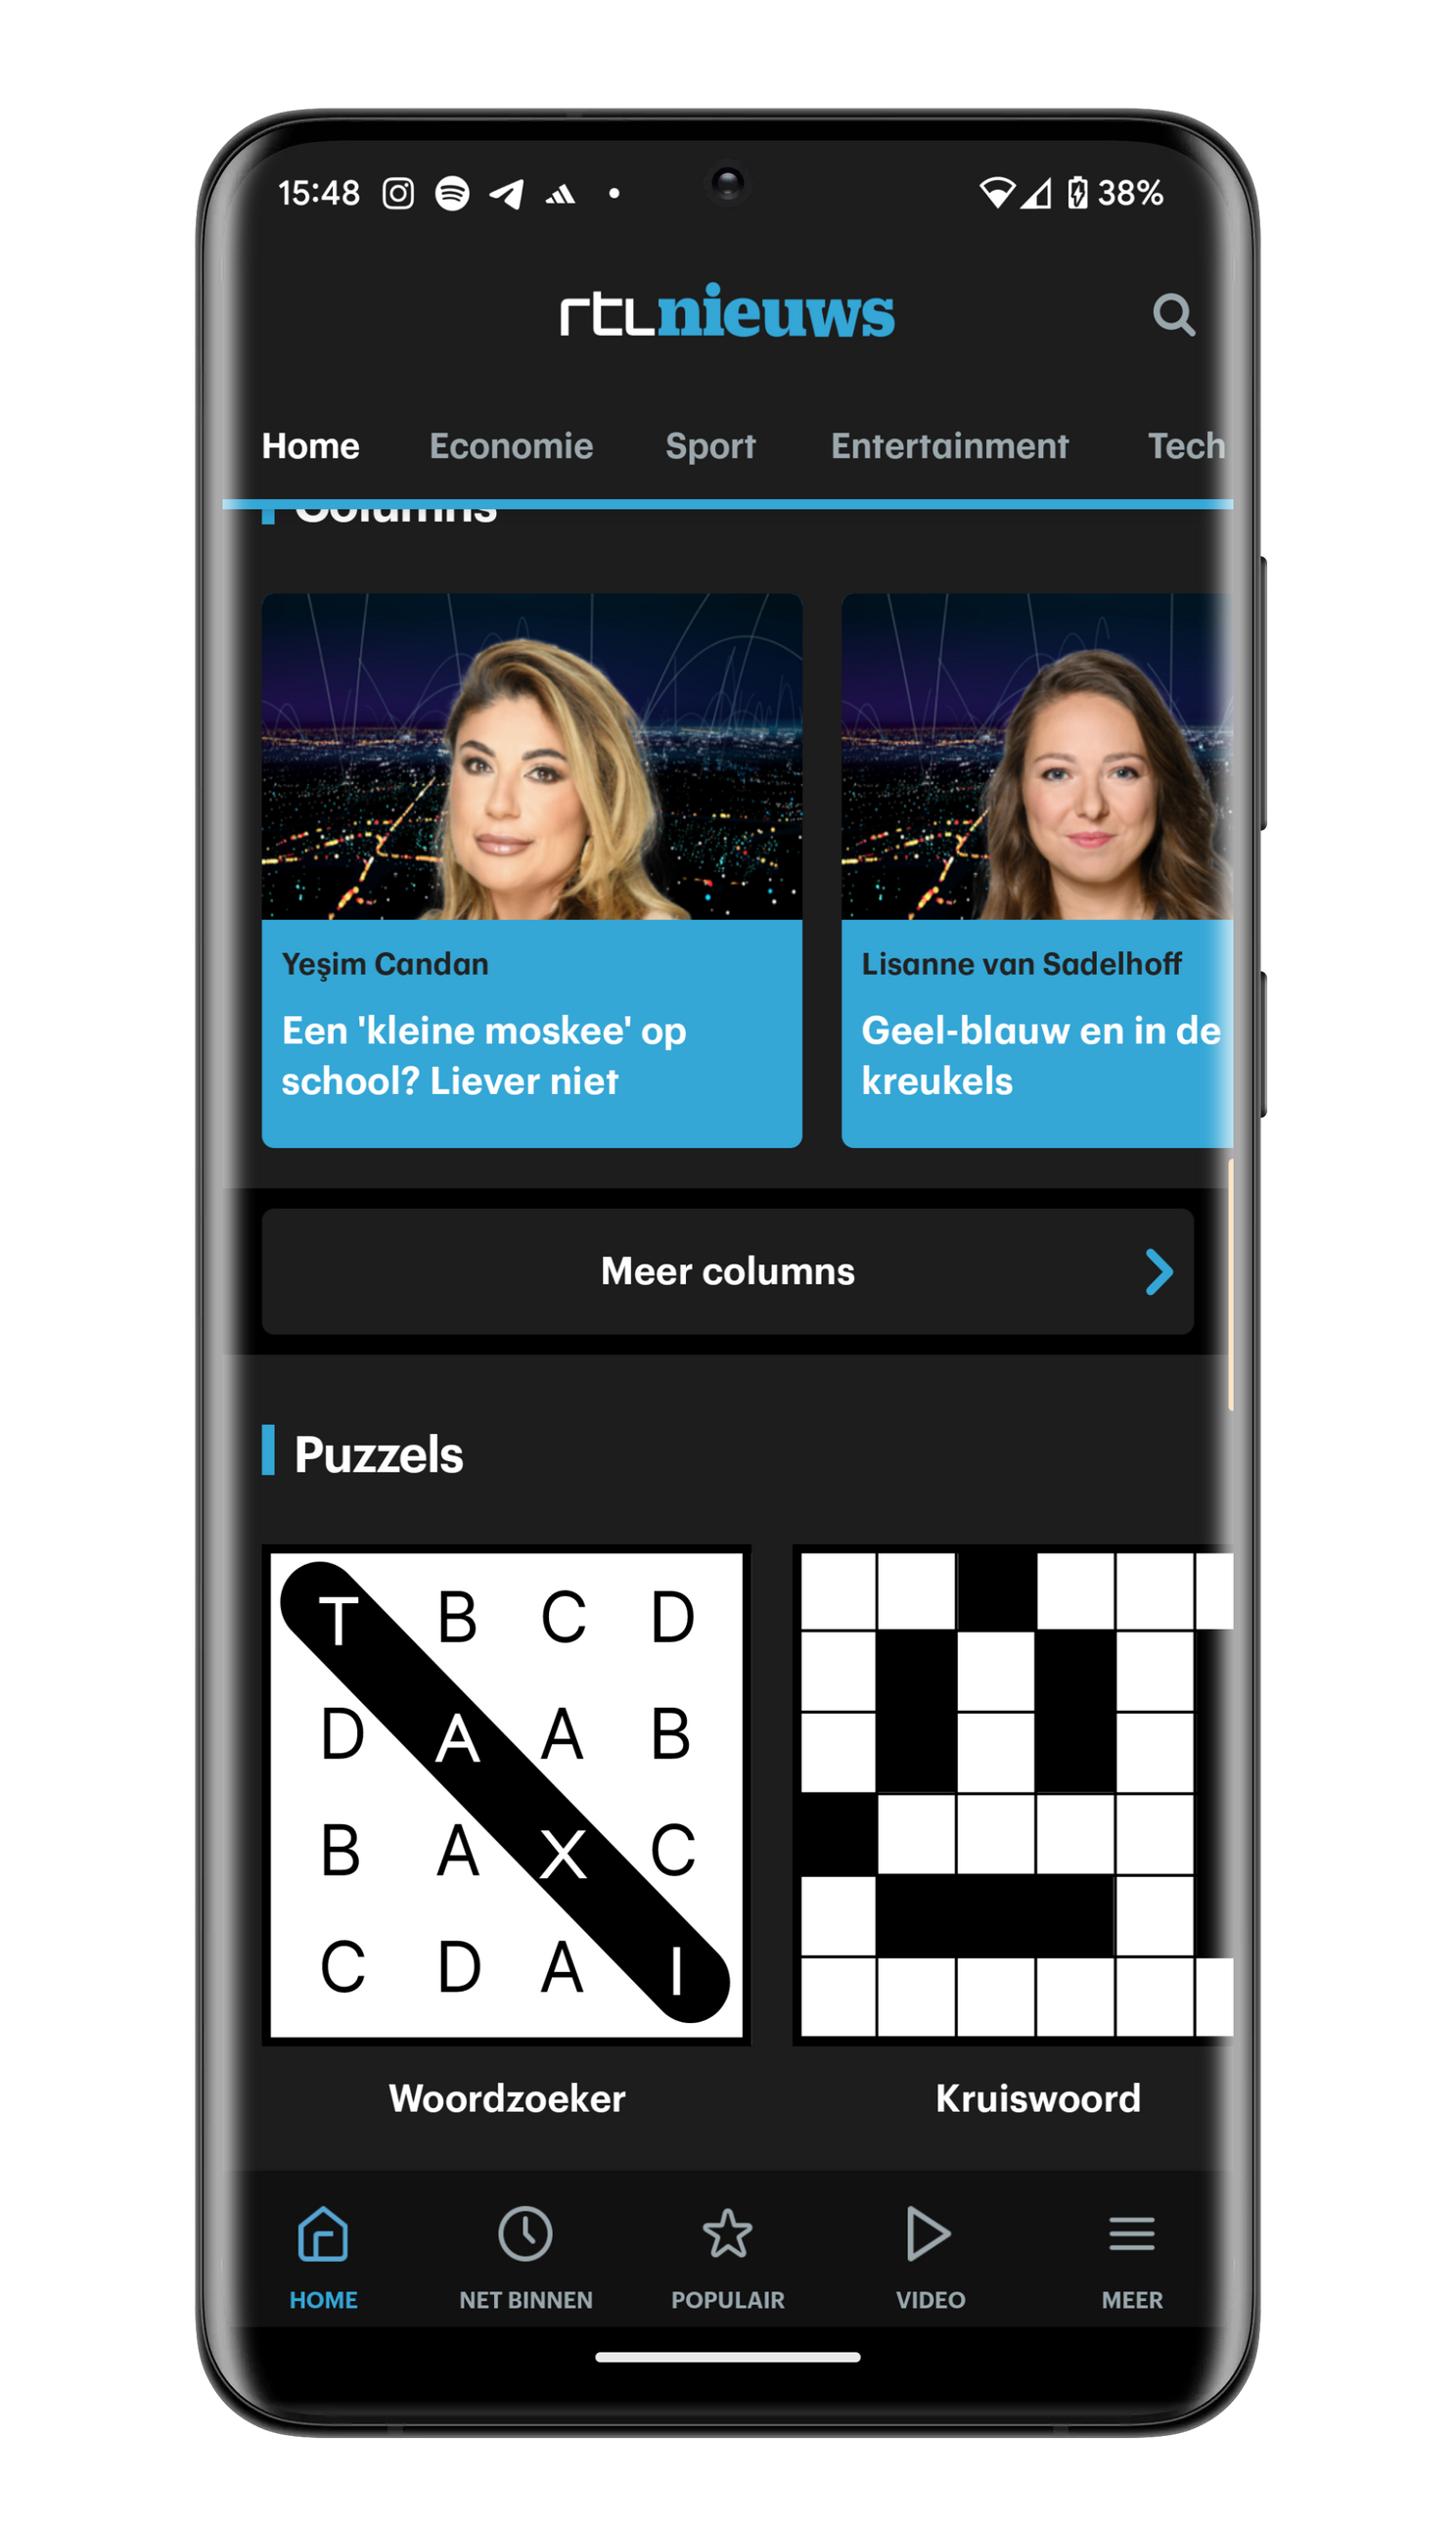 RTL Nieuws app gets an update with 2 new functions